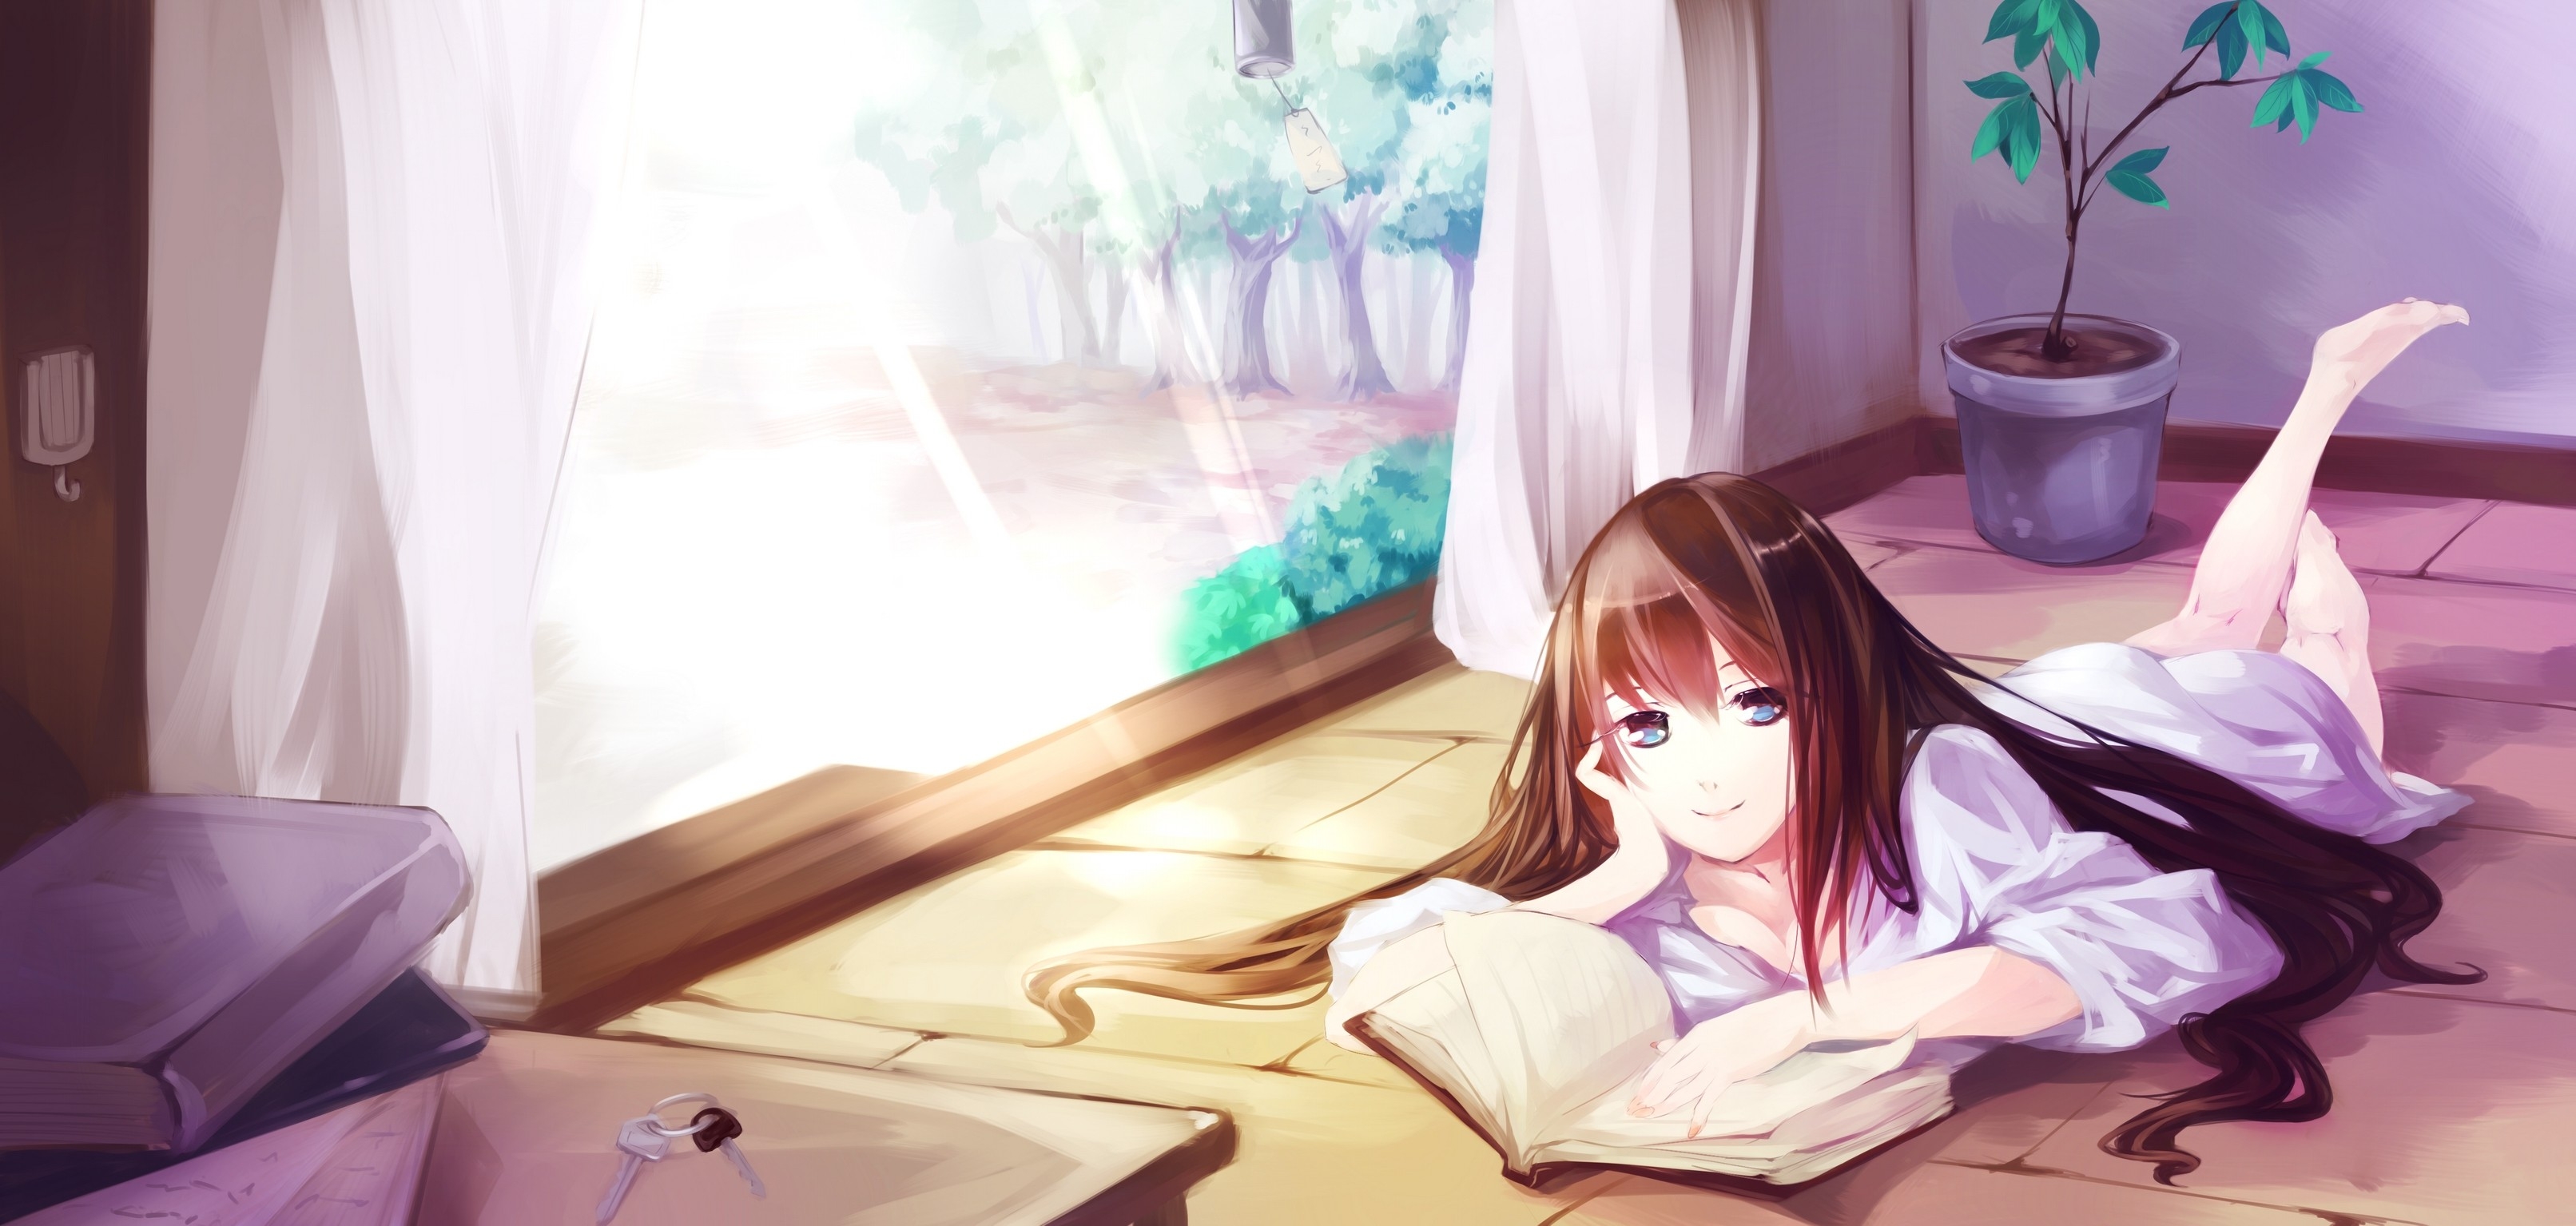 anime girl reading a book in bed